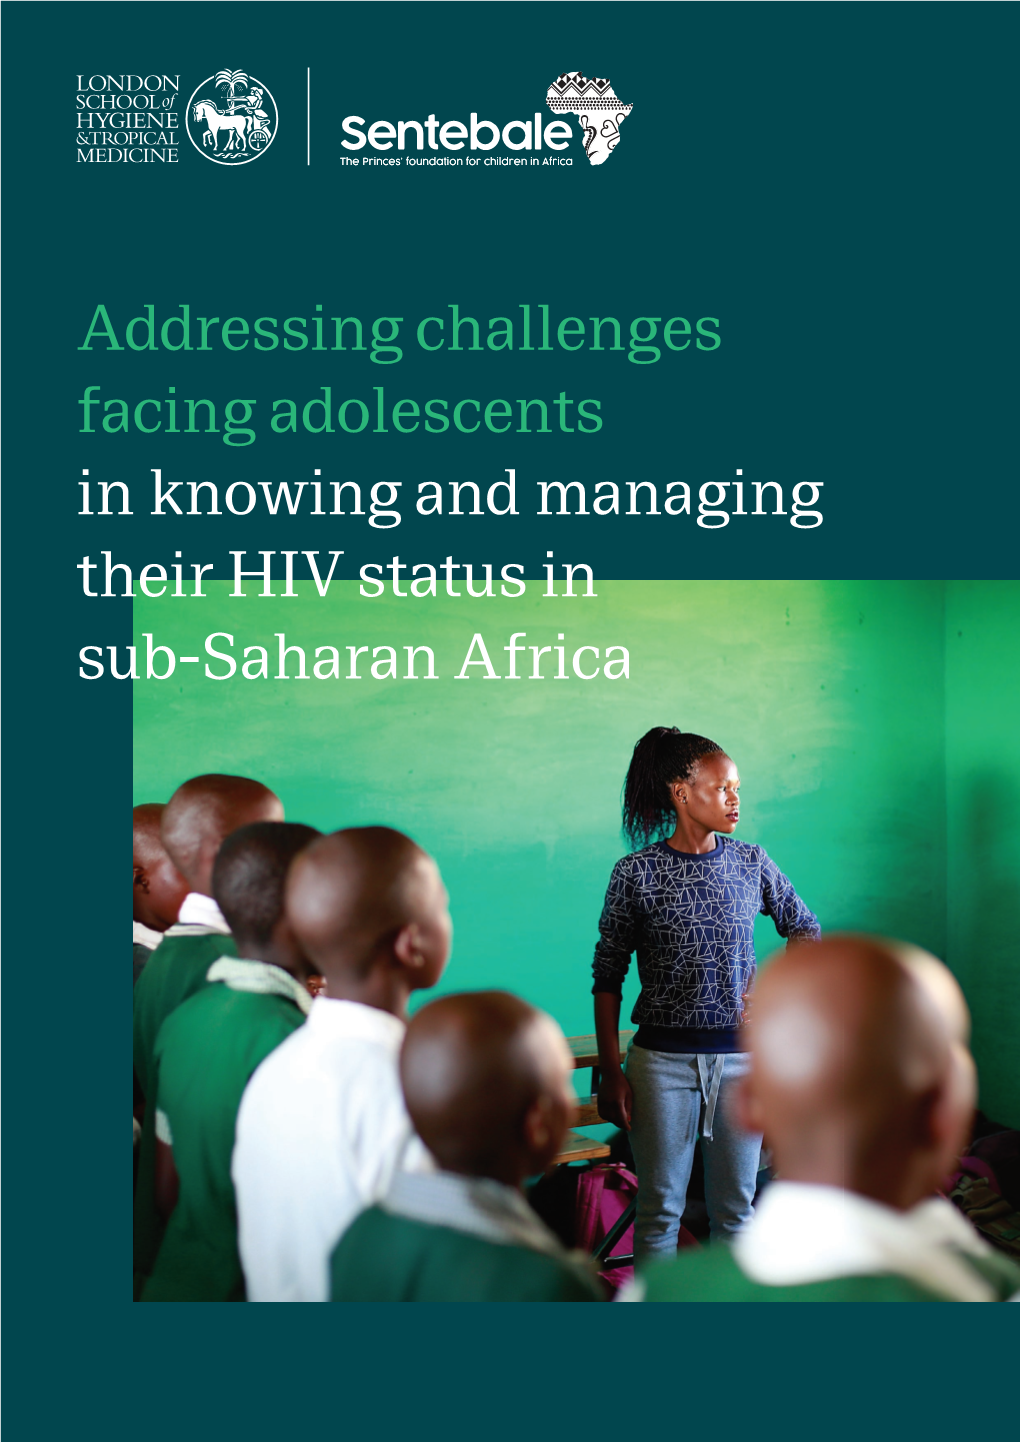 Addressing Challenges Facing Adolescents in Sub-Saharan Africa